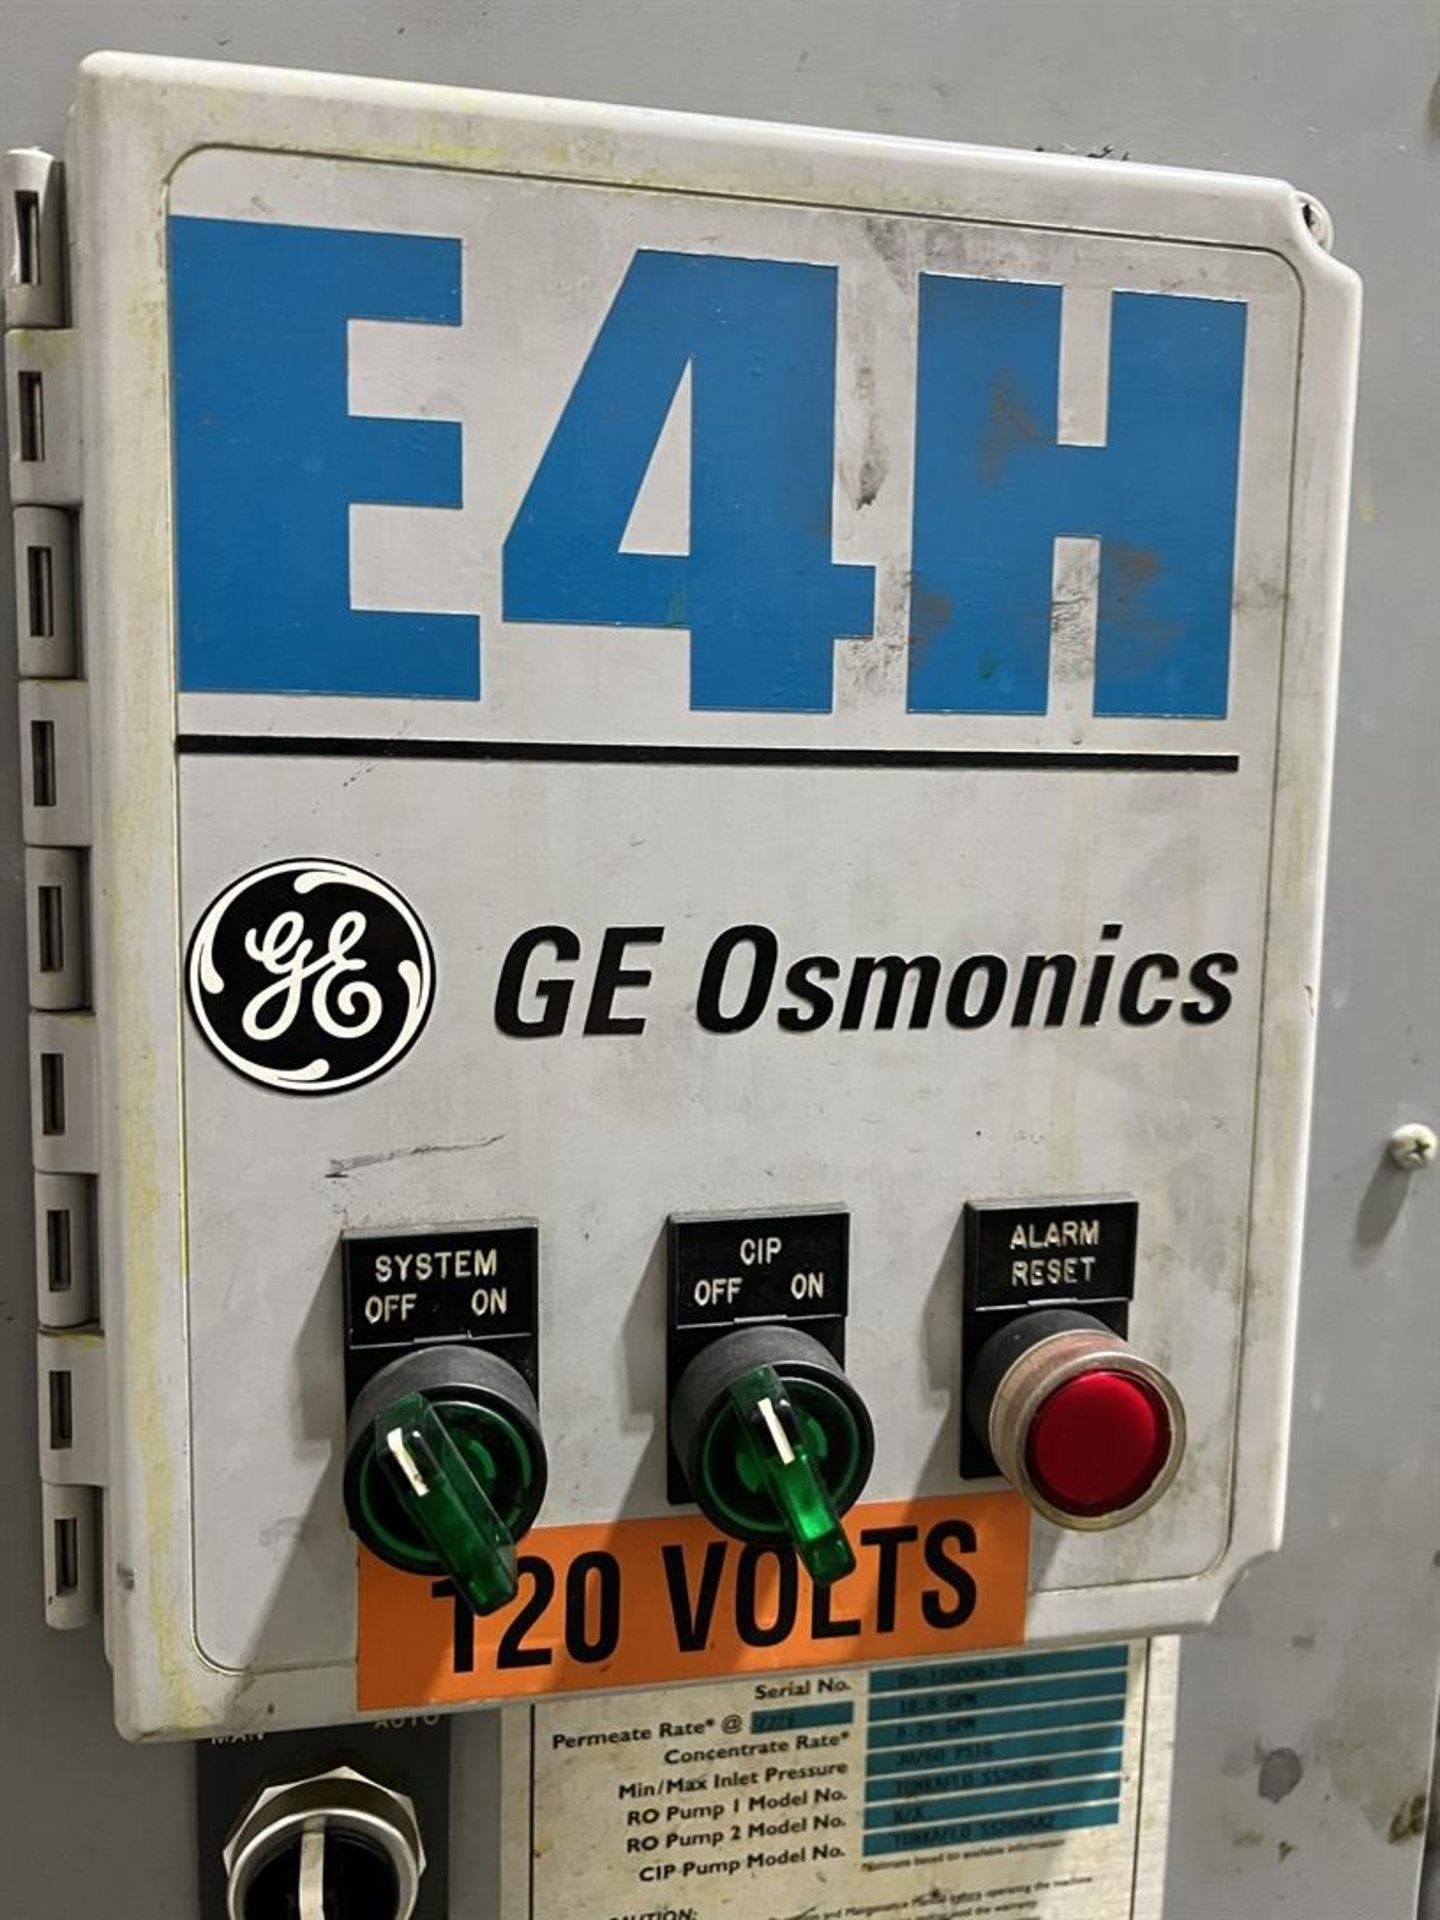 GE OSMONICS E4H-27K DLX Reverse Osmosis System, s/n 05-1200067-05, 18.8 GPM, 6.25 GOM Concentrate - Image 4 of 11